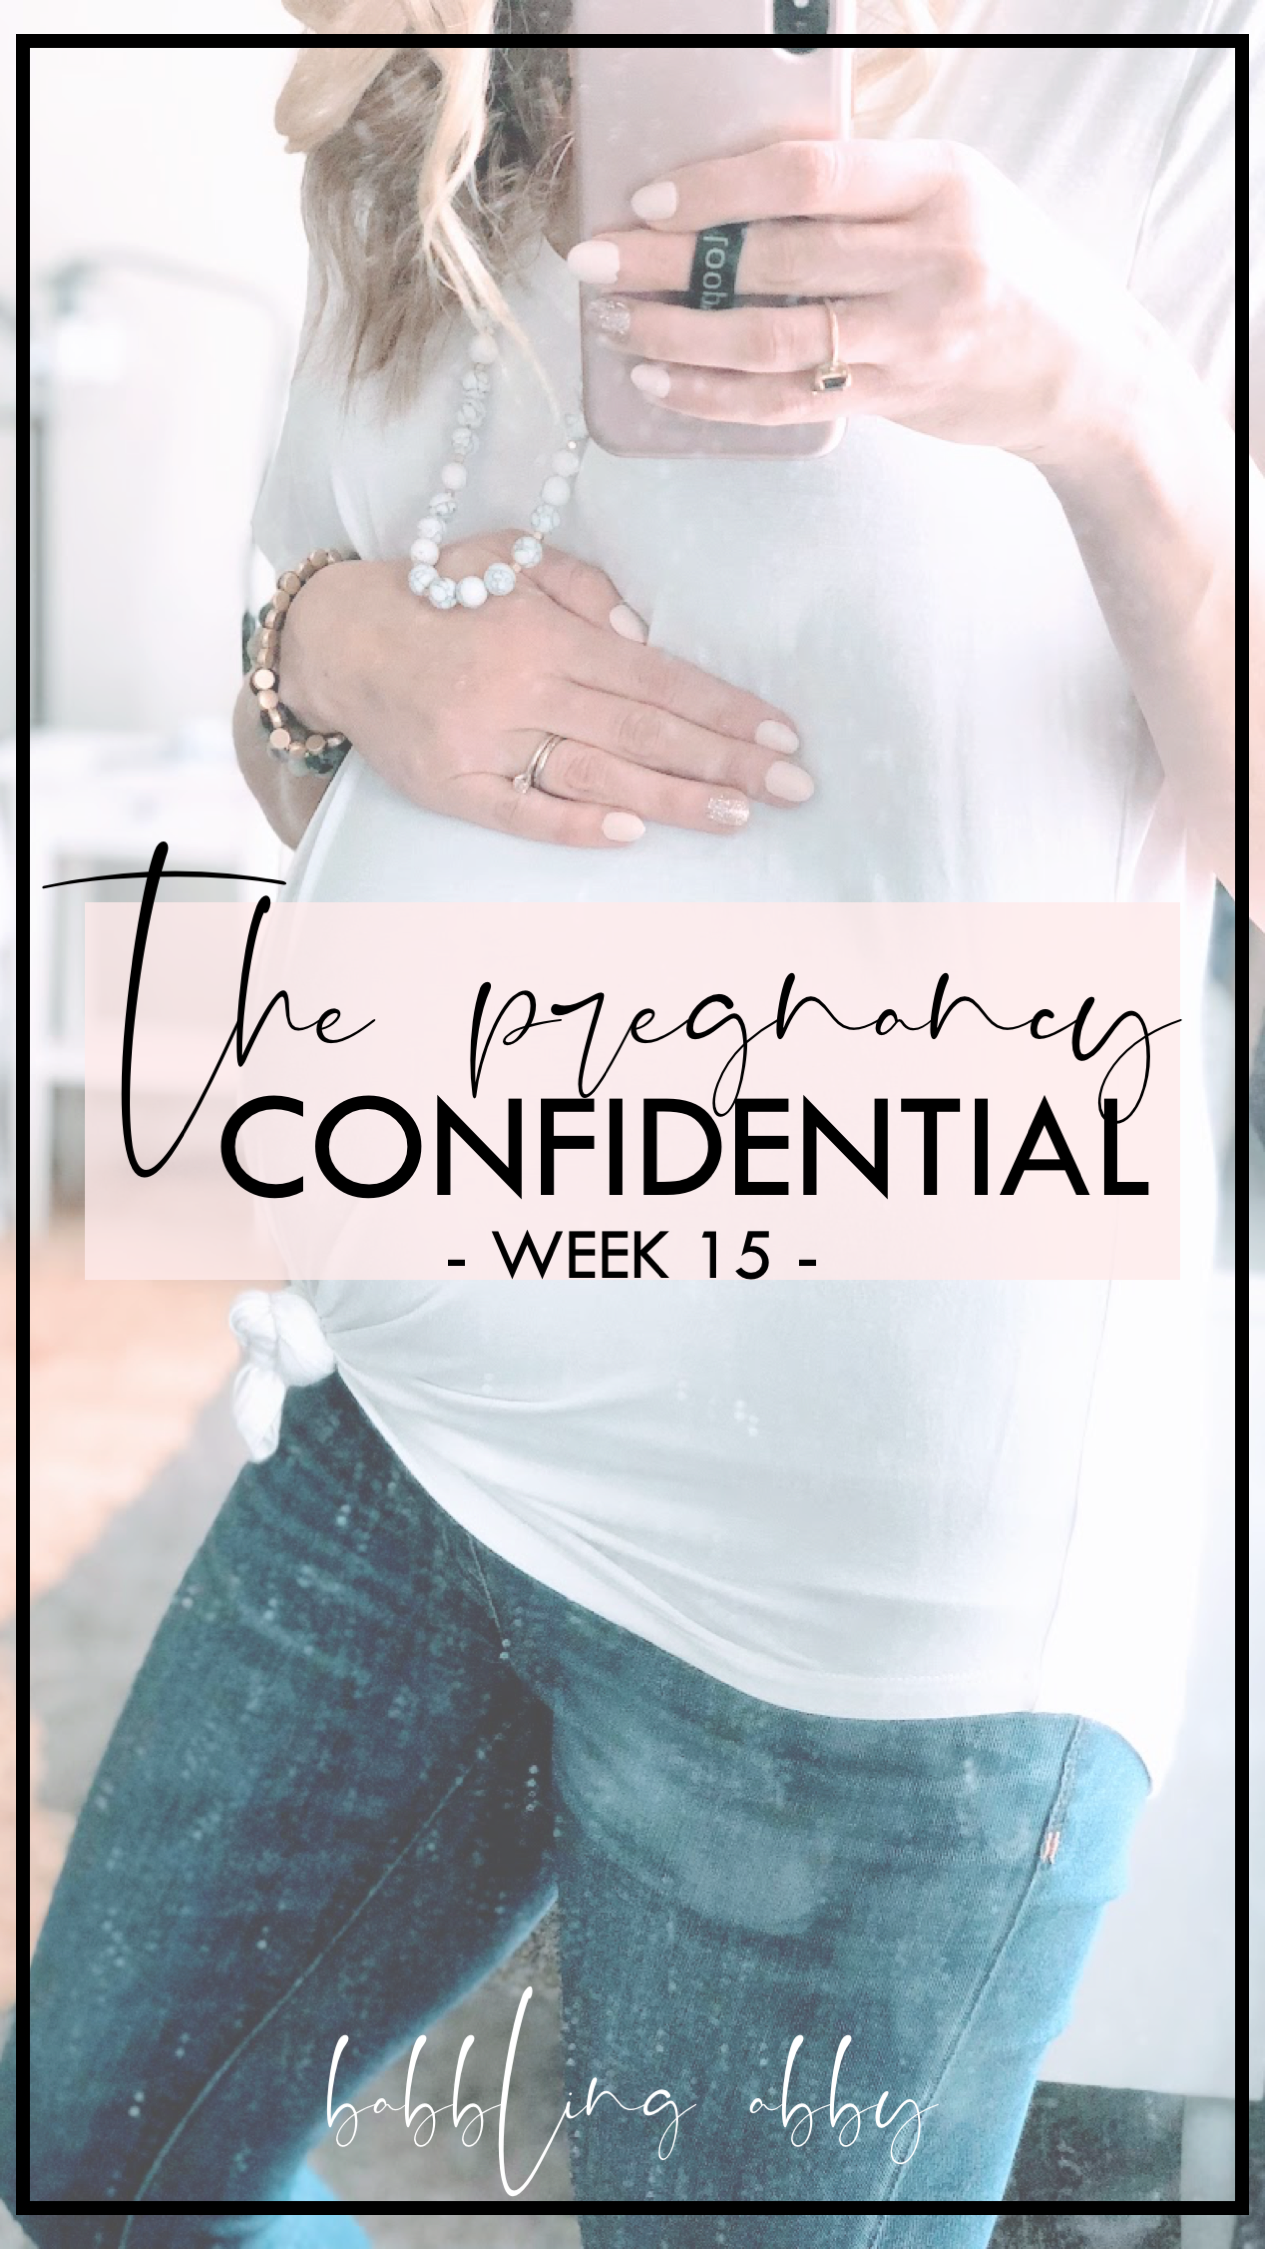 Pregnancy | Sixteen week pregnancy update with Abby from Babbling Abby blog. Read along as this mama chronicles her week by week updates in The Pregnancy Confidential. She shares the reality of her third pregnancy with humor, love, and sarcasm, all while parenting, running a small business, and navigating life with her husband and three children.